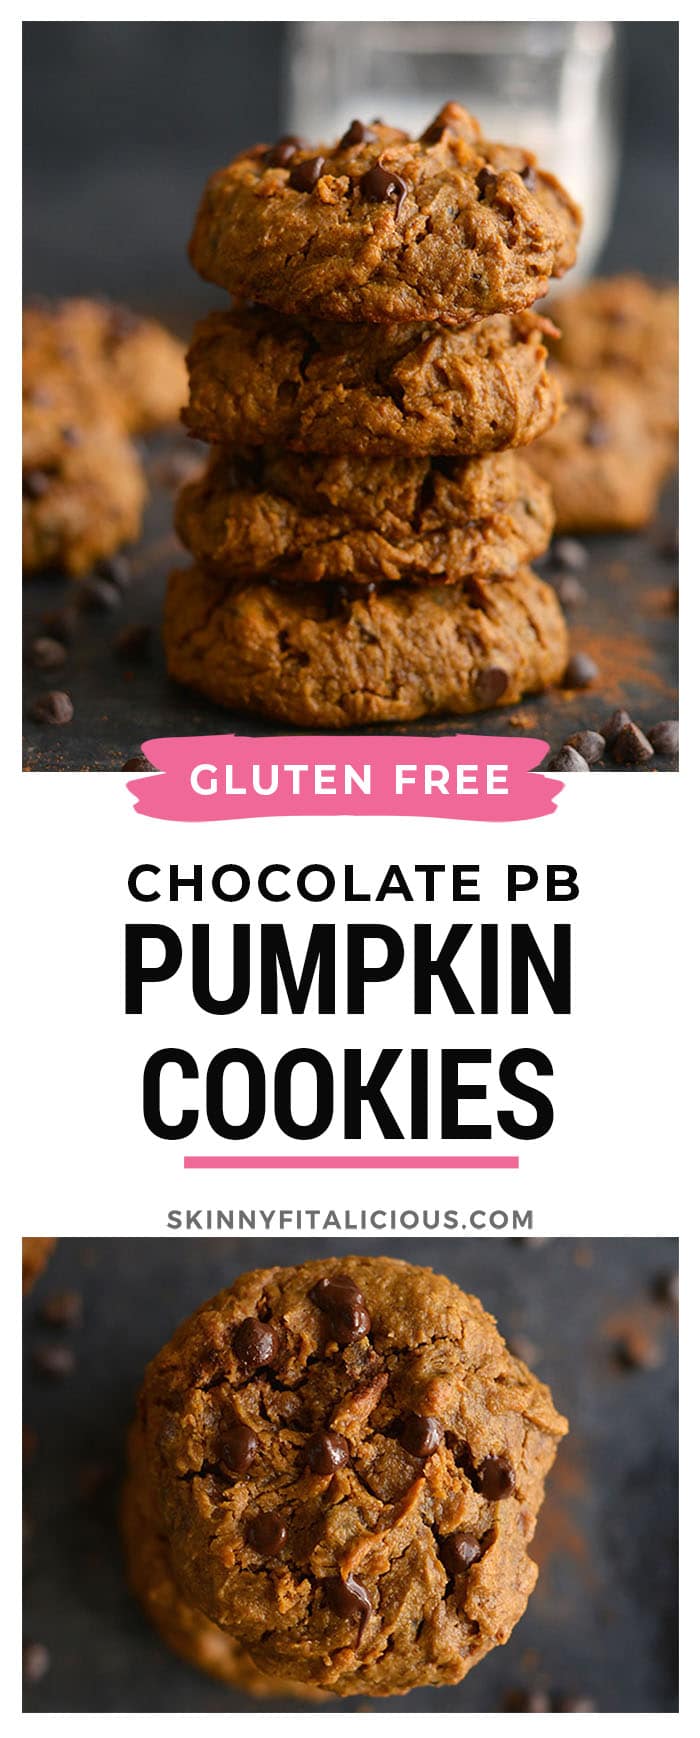 Get your pumpkin and chocolate fix with a creamy, melt-in-your-mouth Healthy Pumpkin Peanut Butter Chocolate Chip Cookies. Low Calorie, Gluten Free and Vegan with a Paleo substitute!